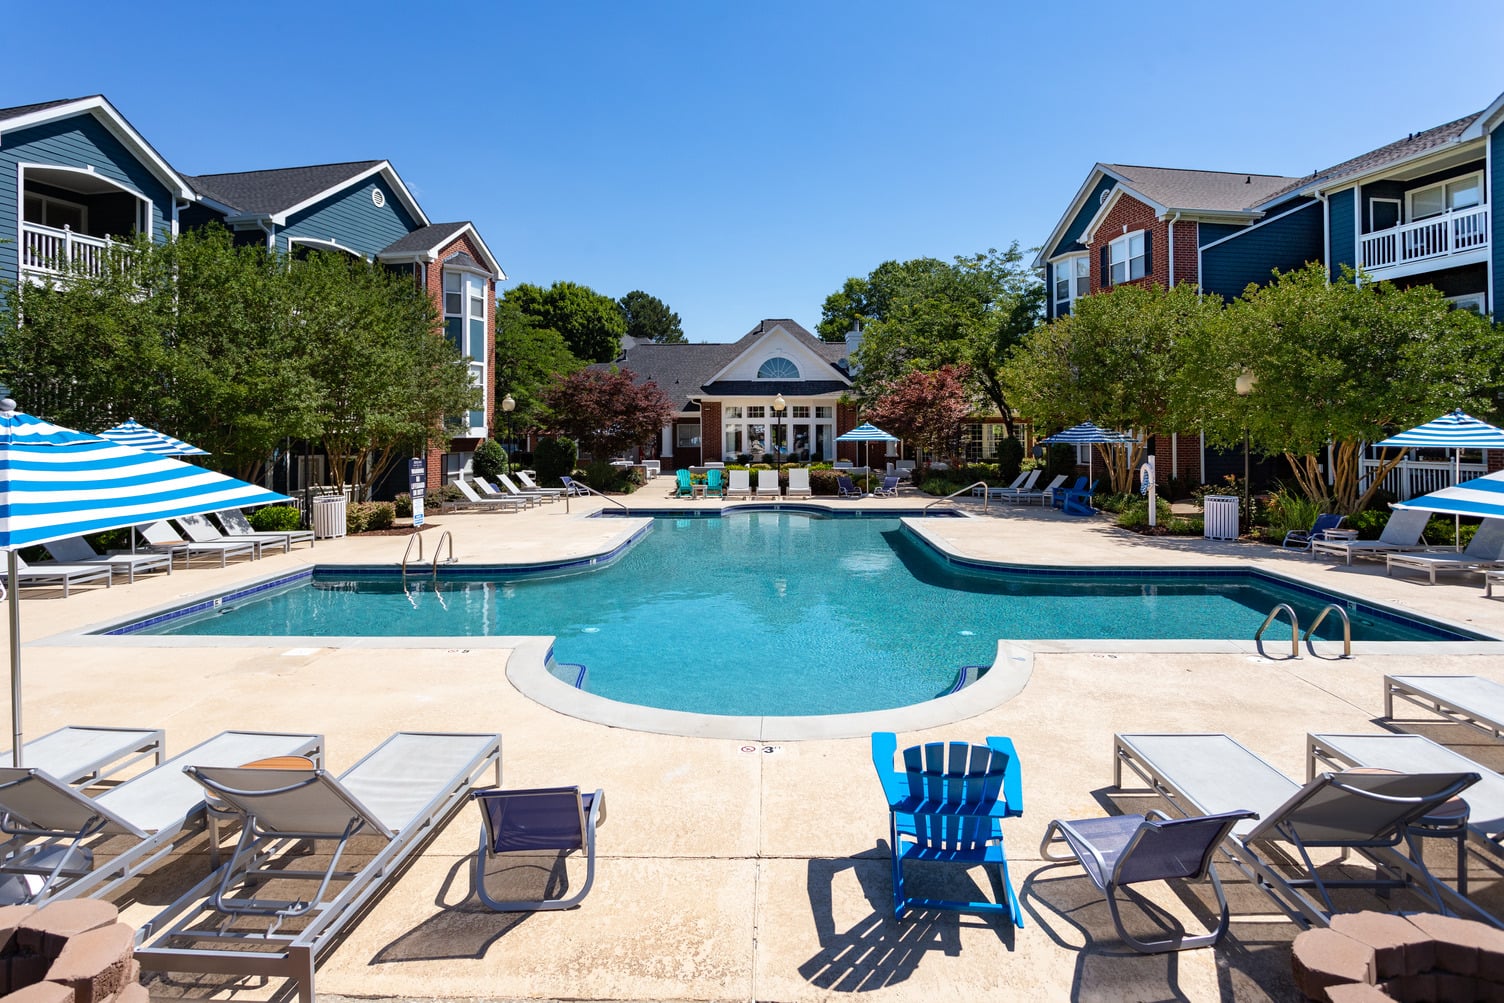 37th Parallel Properties Enters The Charlotte Market with Acquisition of 312-Unit Greys Harbor at Lake Norman in Huntersville